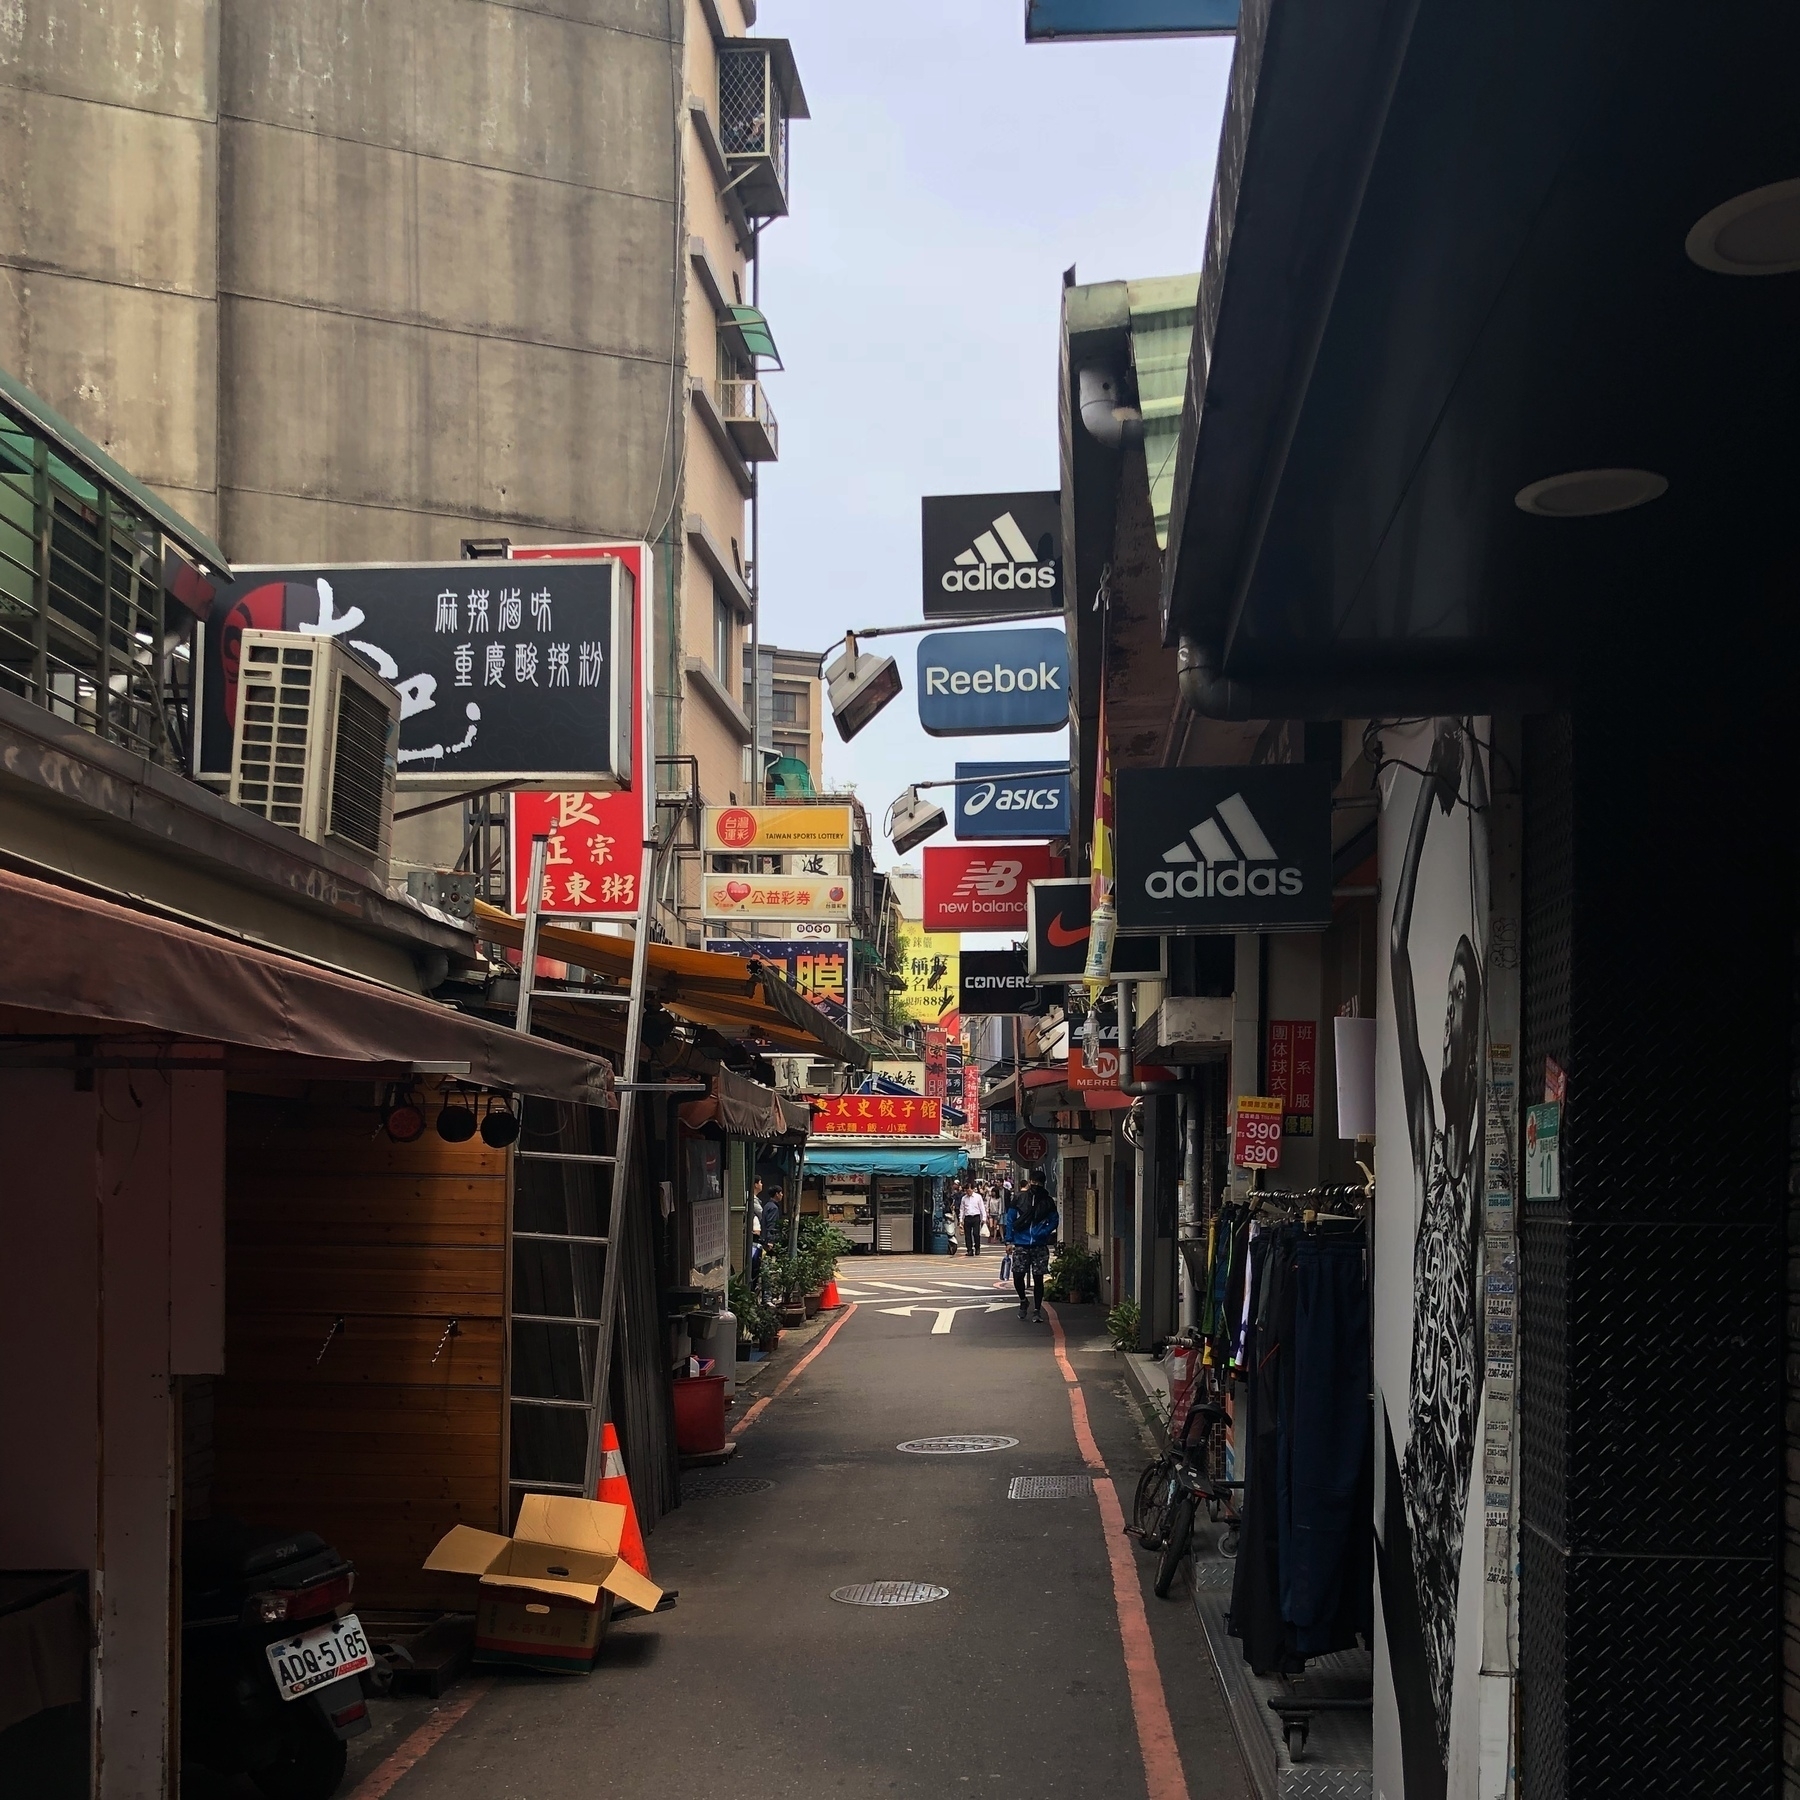 Narrow lane in Taipei with overlapping street signs.